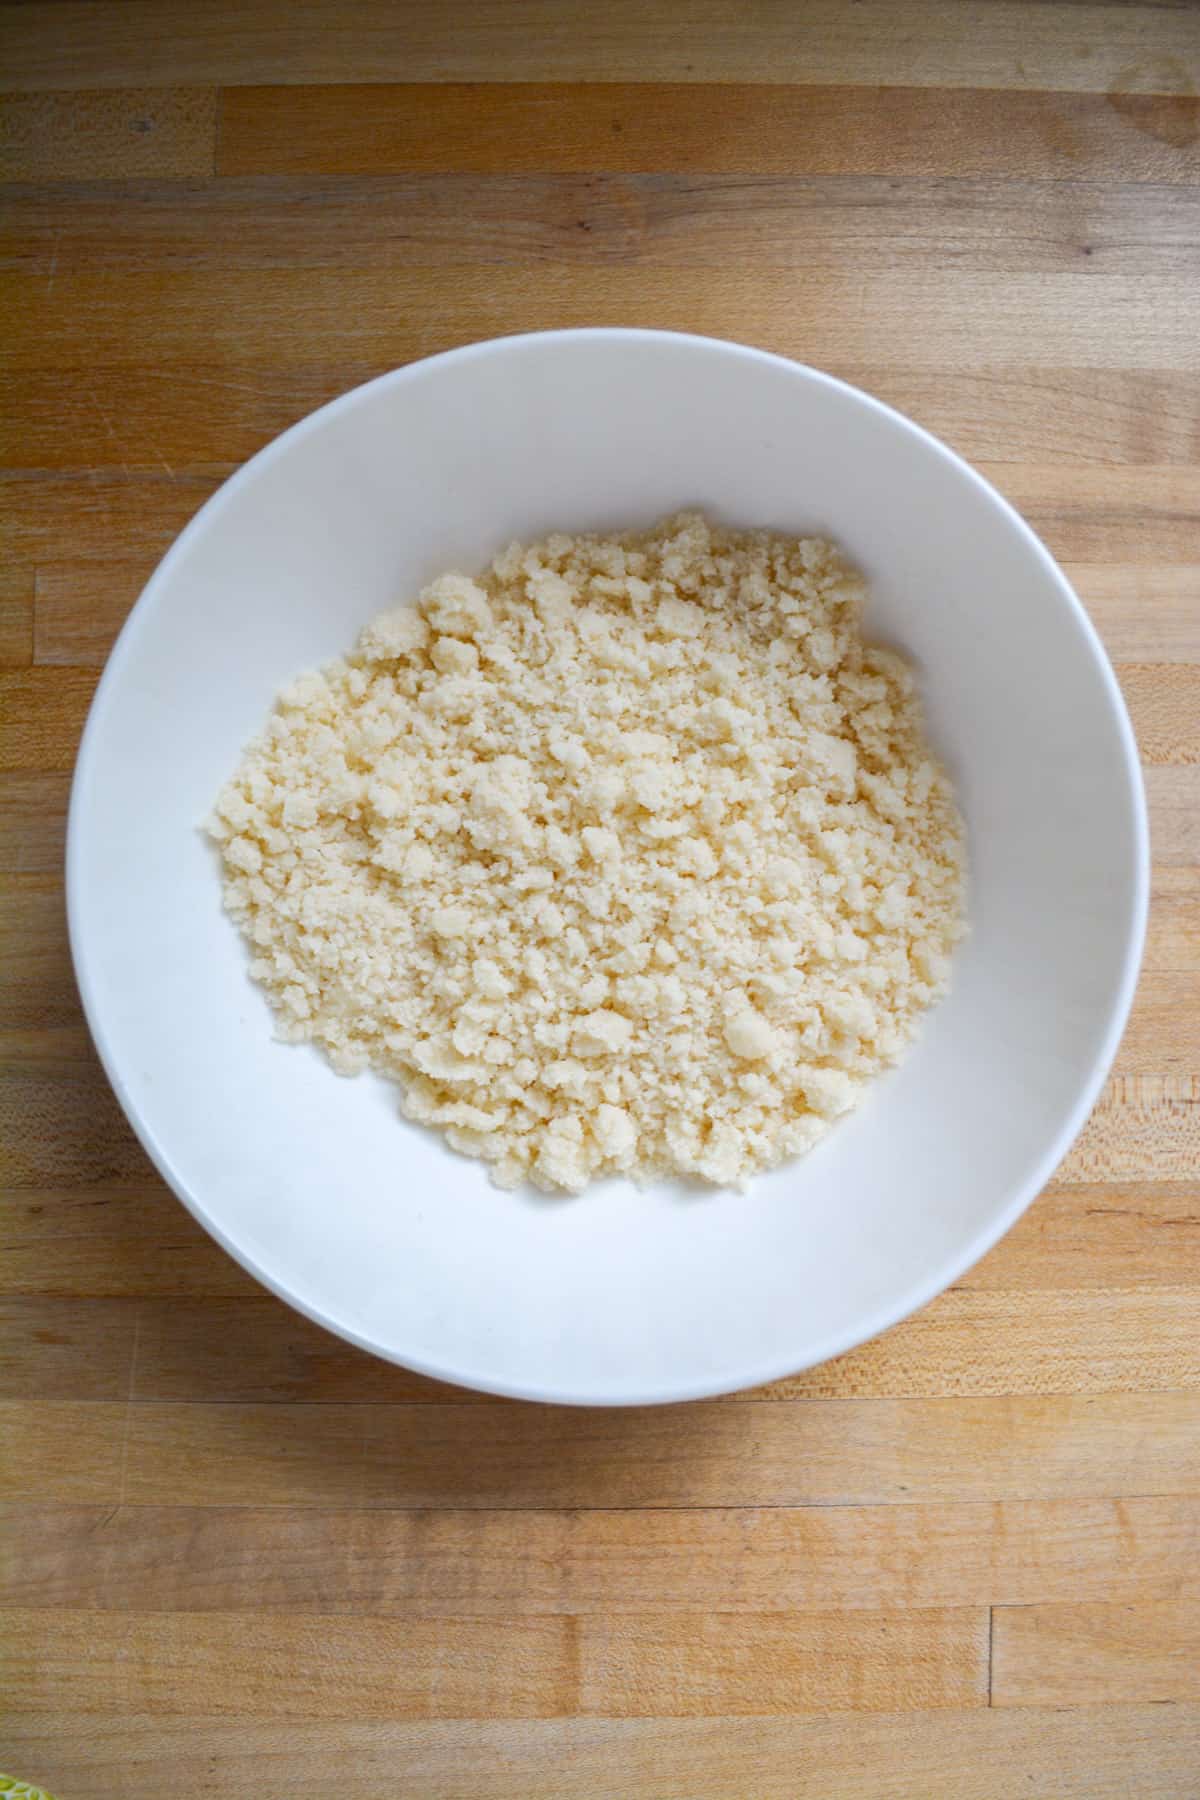 Crumb topping in a bowl.